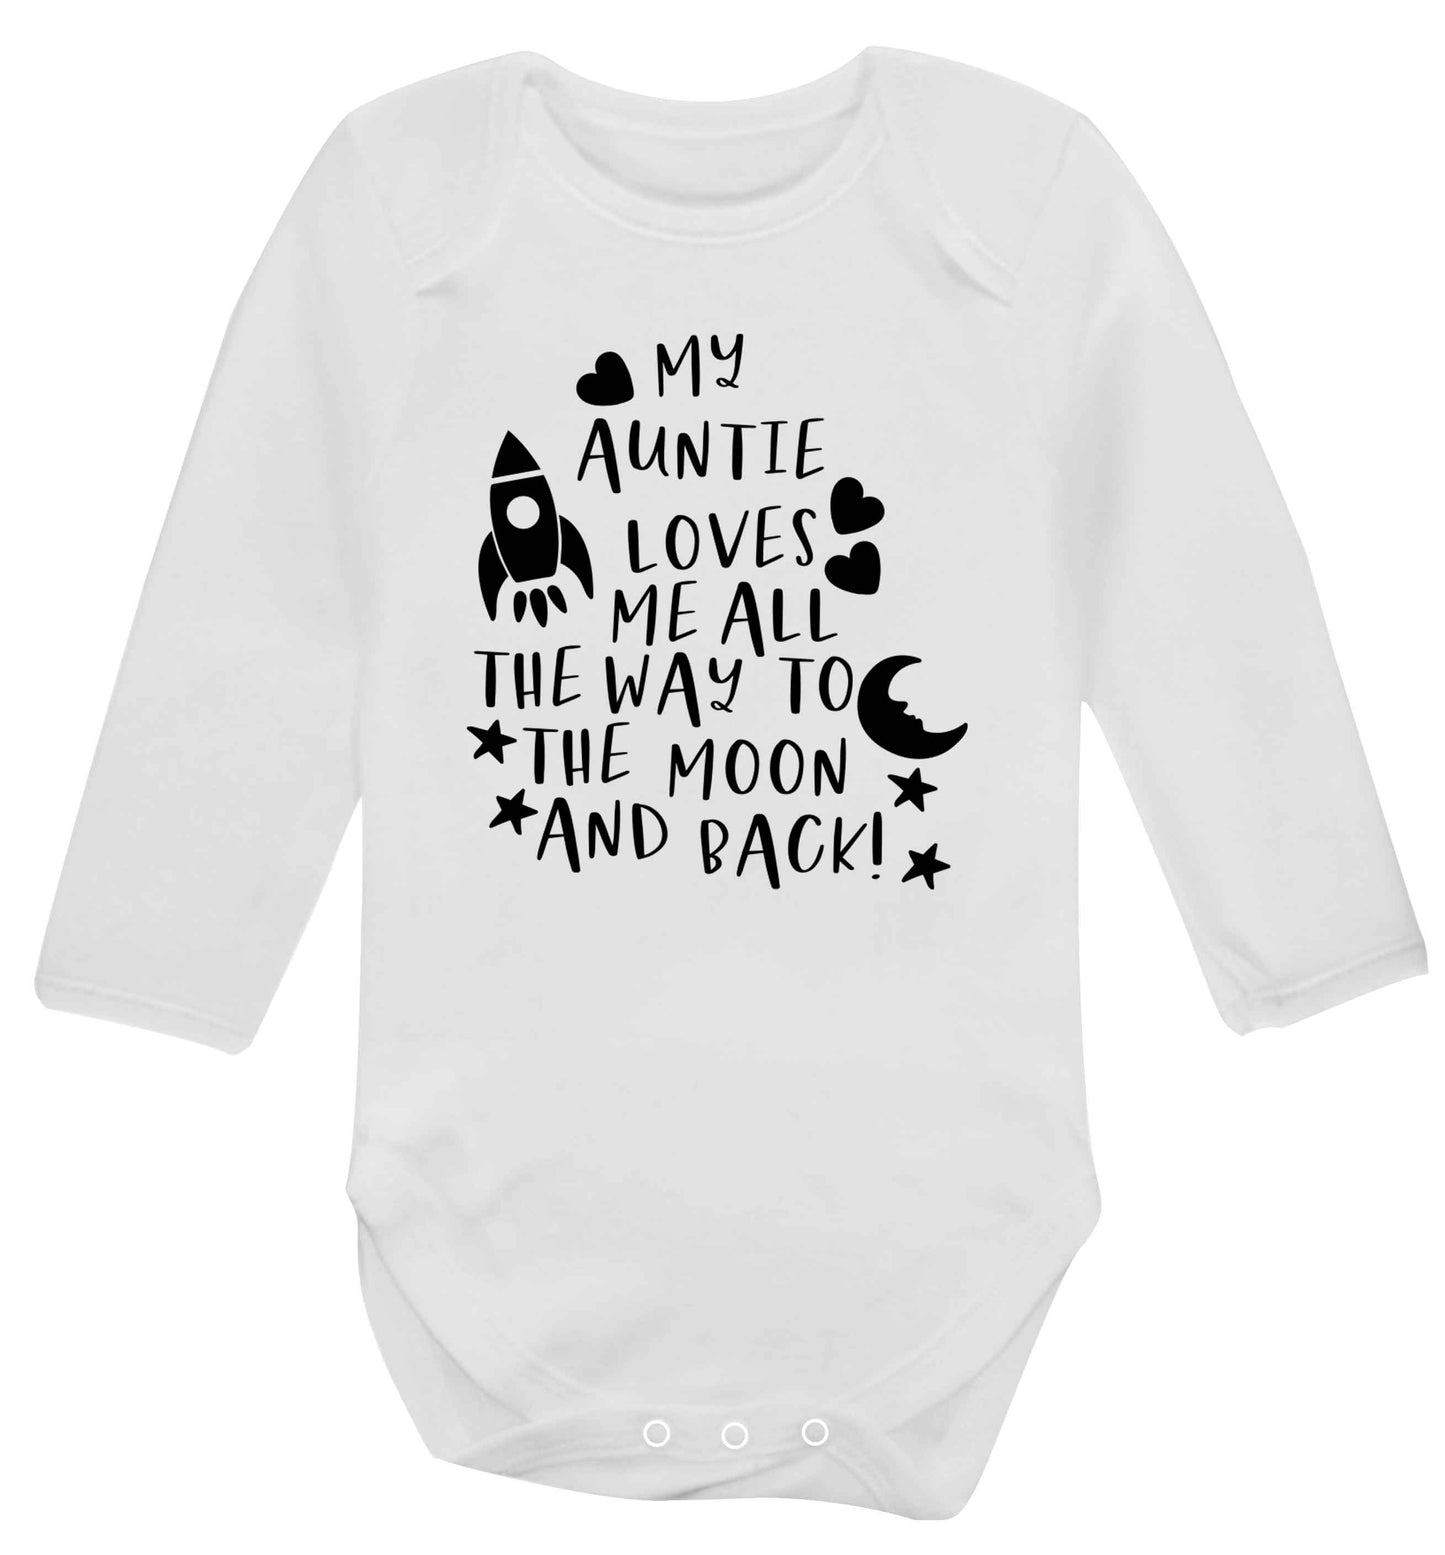 My auntie loves me all the way to the moon and back Baby Vest long sleeved white 6-12 months